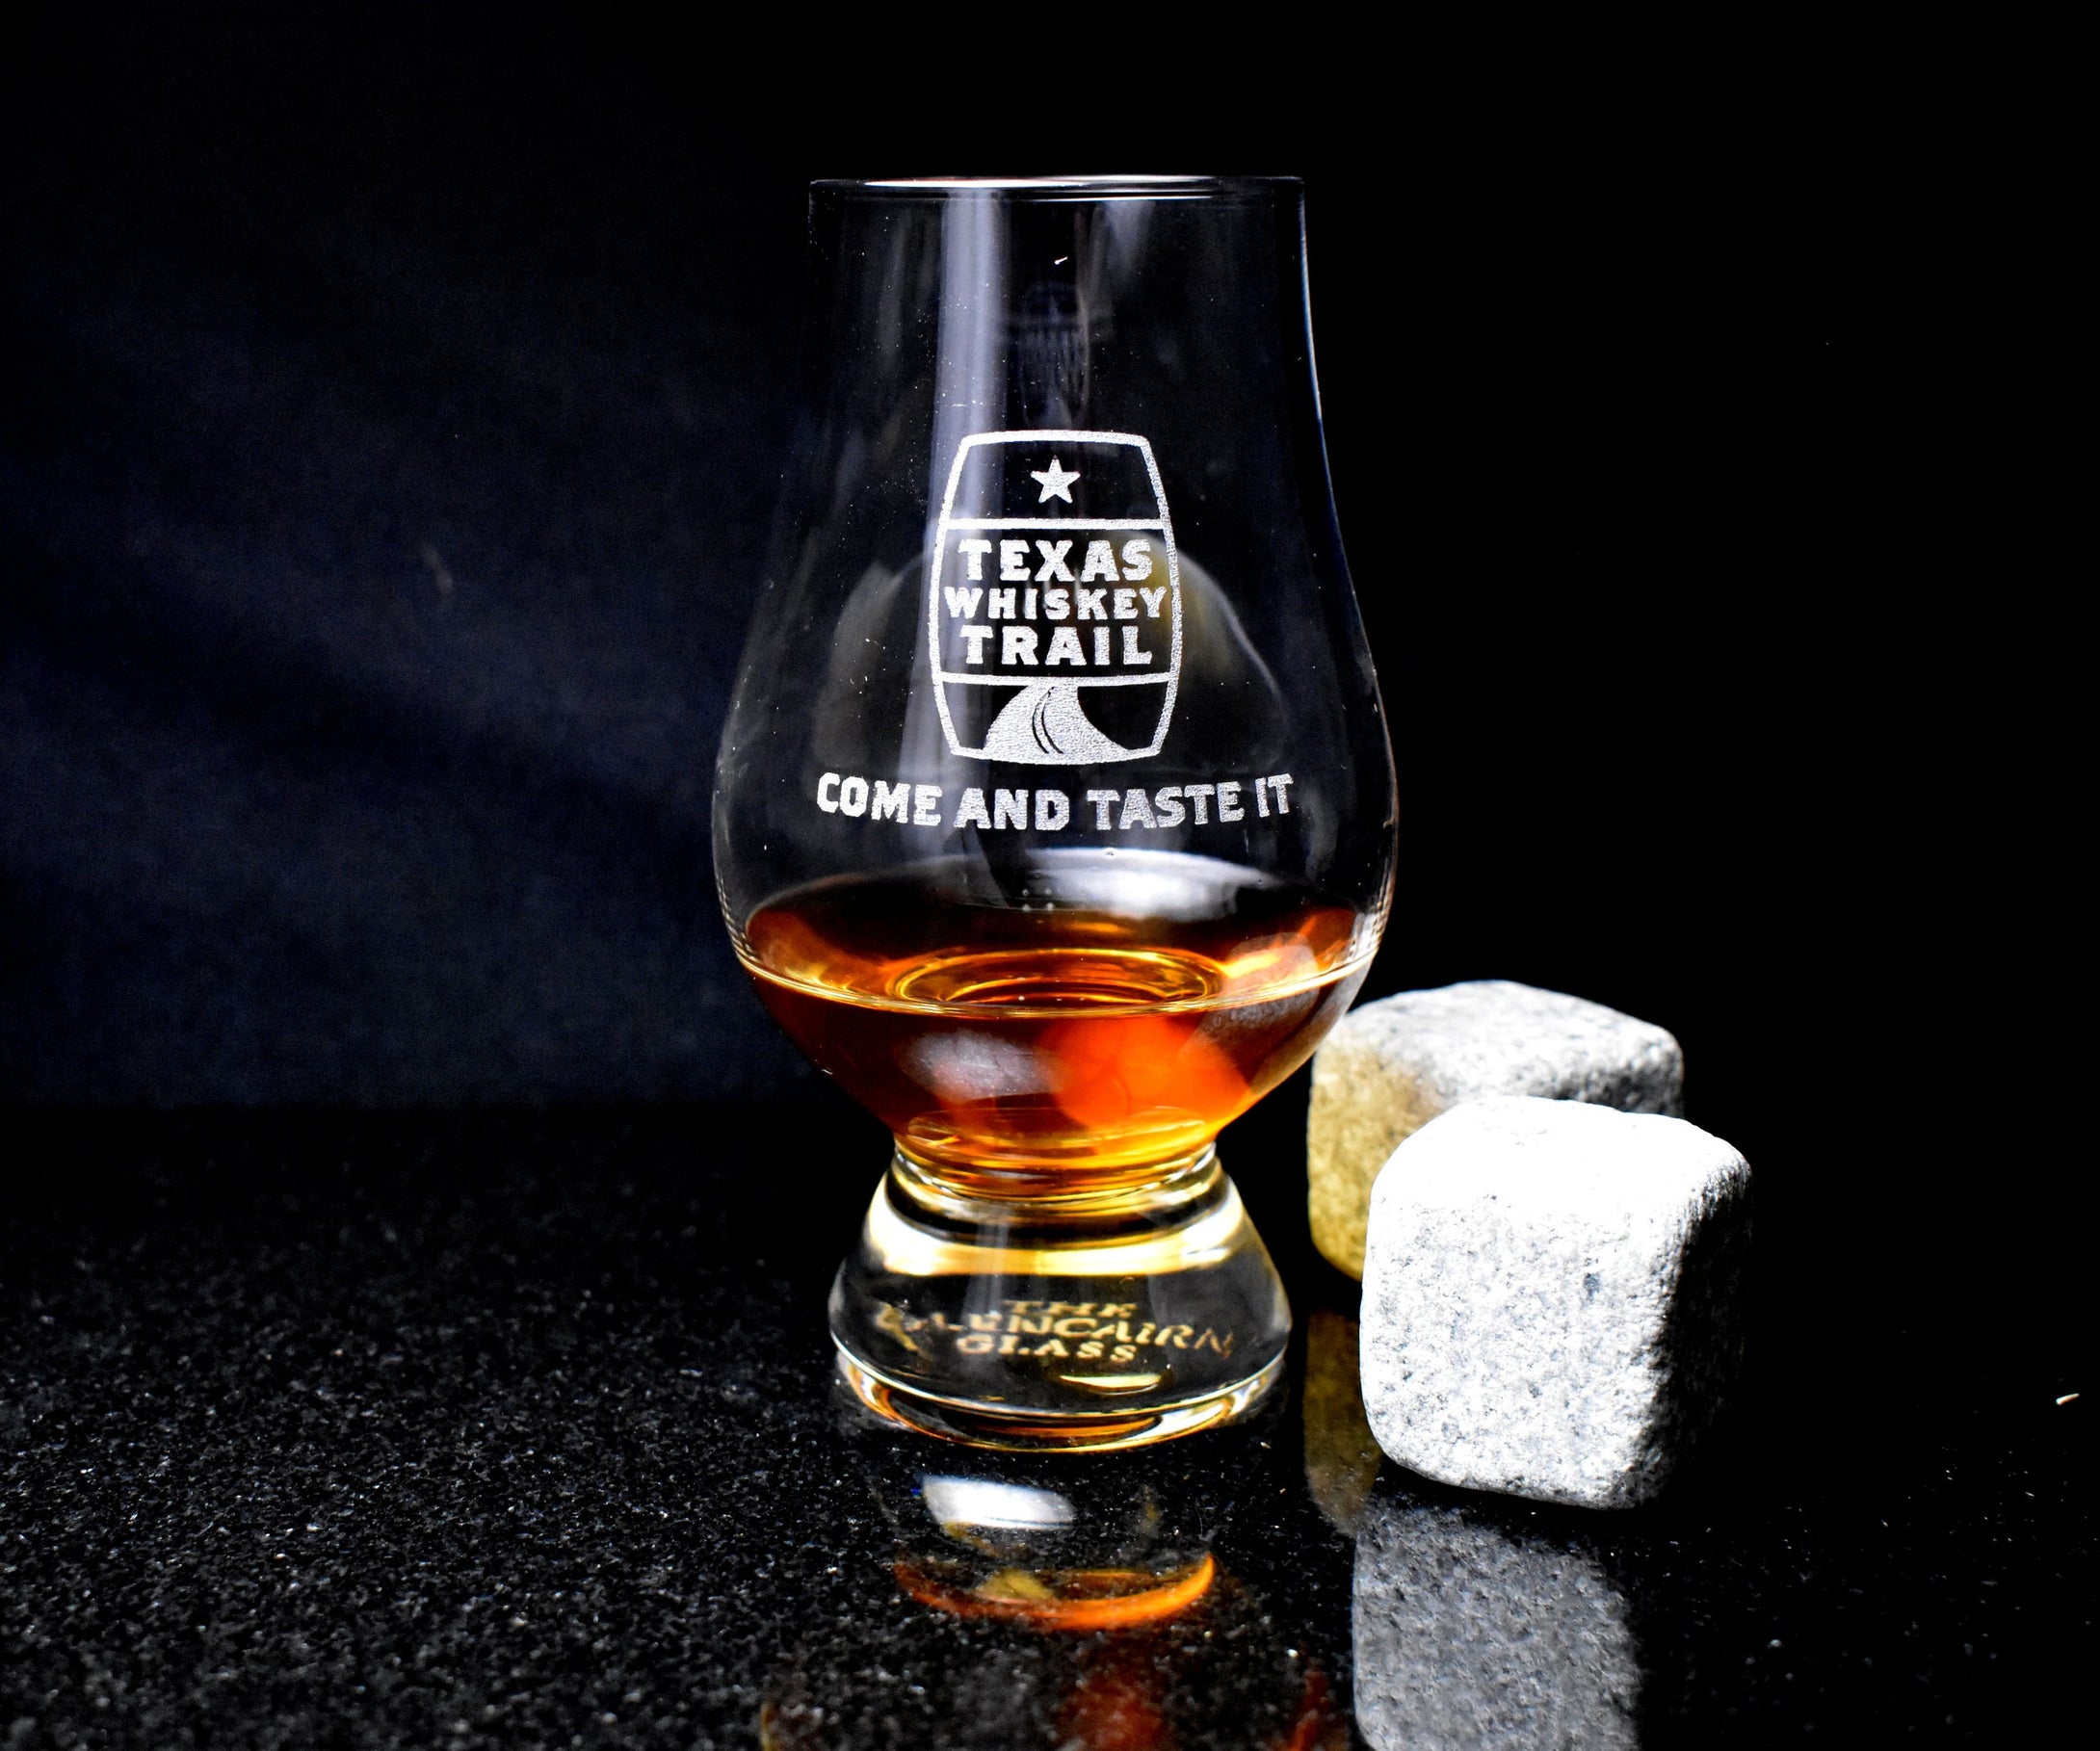 Official Texas Whiskey Trail Tasting Glass-come and taste it